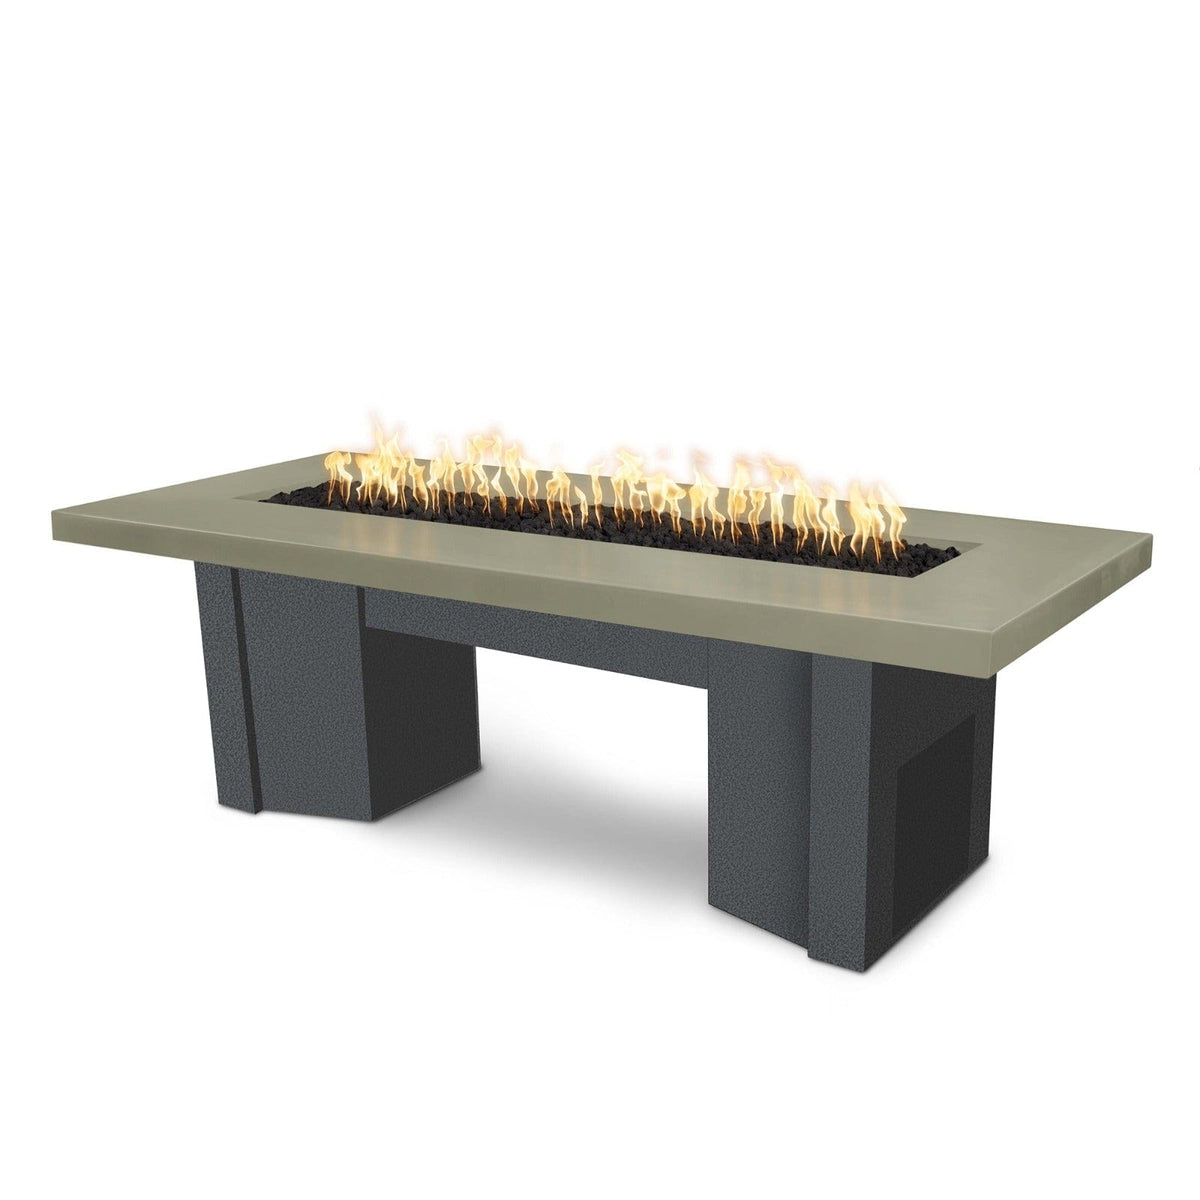 The Outdoor Plus Fire Features Ash (-ASH) / Silver Vein Powder Coated Steel (-SLV) The Outdoor Plus 60&quot; Alameda Fire Table Smooth Concrete in Liquid Propane - Flame Sense System with Push Button Spark Igniter / OPT-ALMGFRC60FSEN-LP